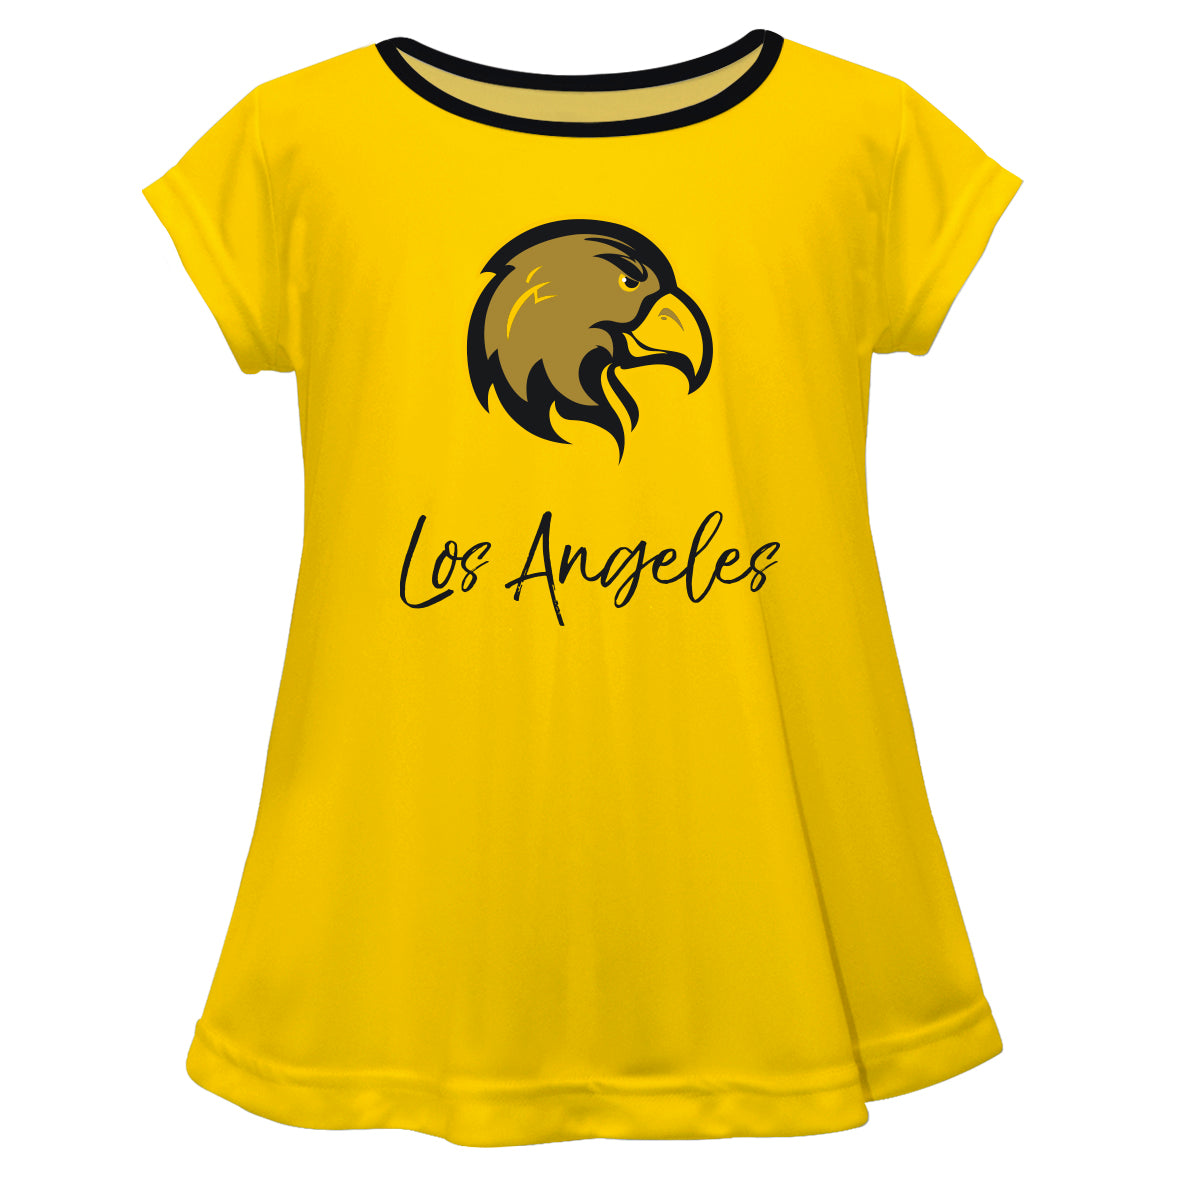 Cal State LA Golden Eagles Girls Game Day Short Sleeve Gold Laurie Top by Vive La Fete